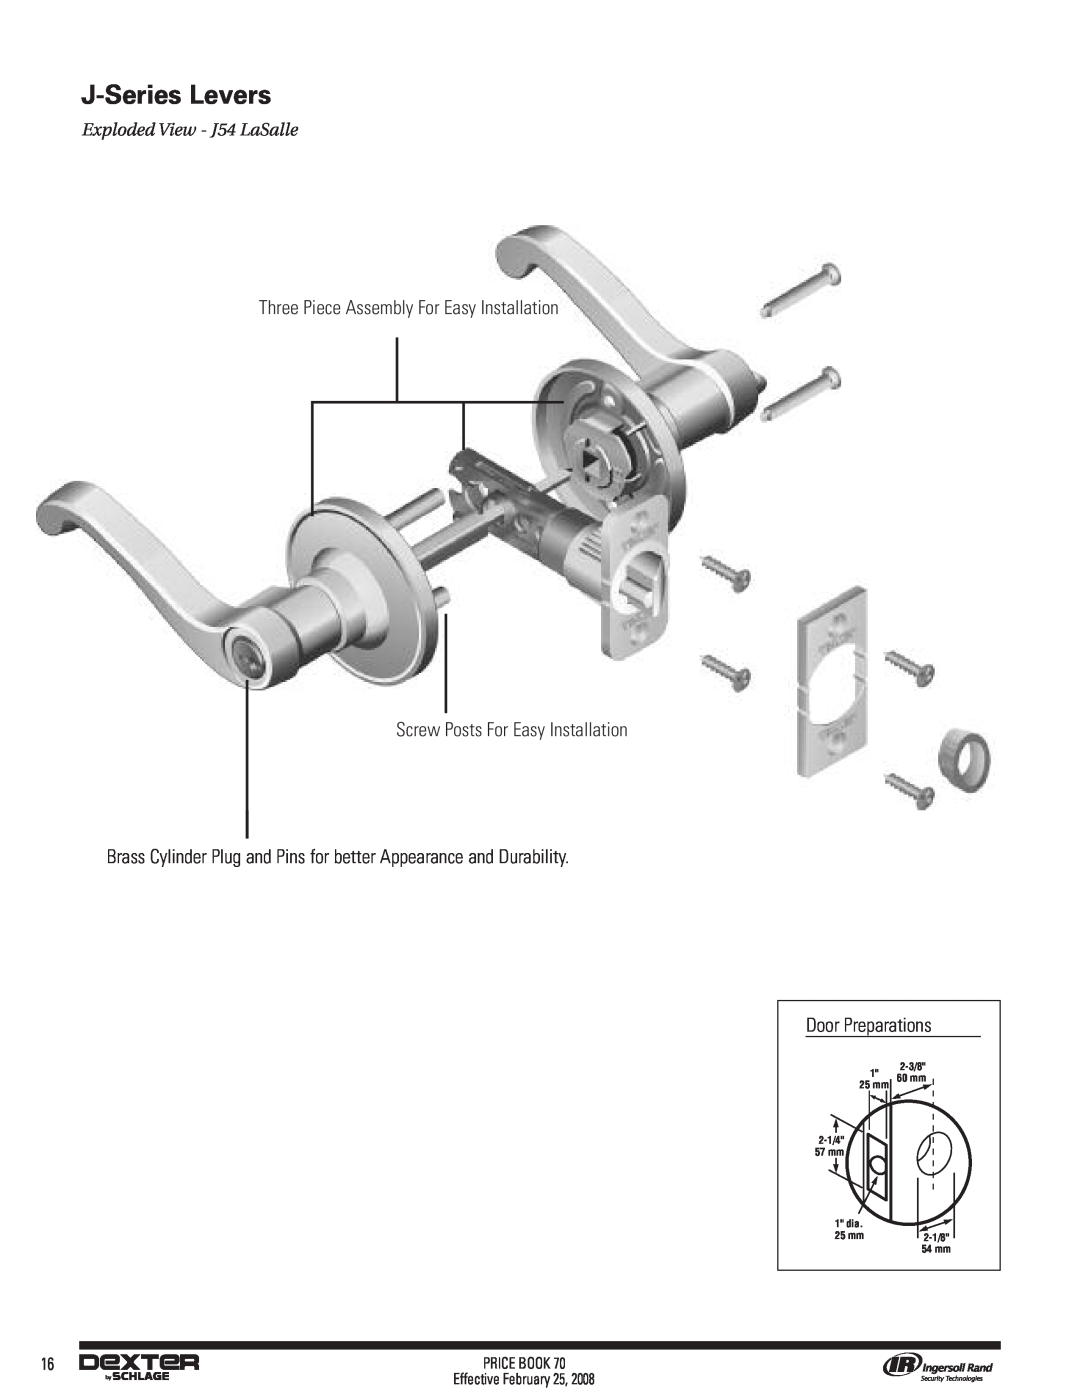 Schlage 70A manual J-SeriesLevers, Exploded View - J54 LaSalle, Door Preparations, 2-3/8, 60 mm, 2-1/4, 57 mm, 1 dia, 25 mm 